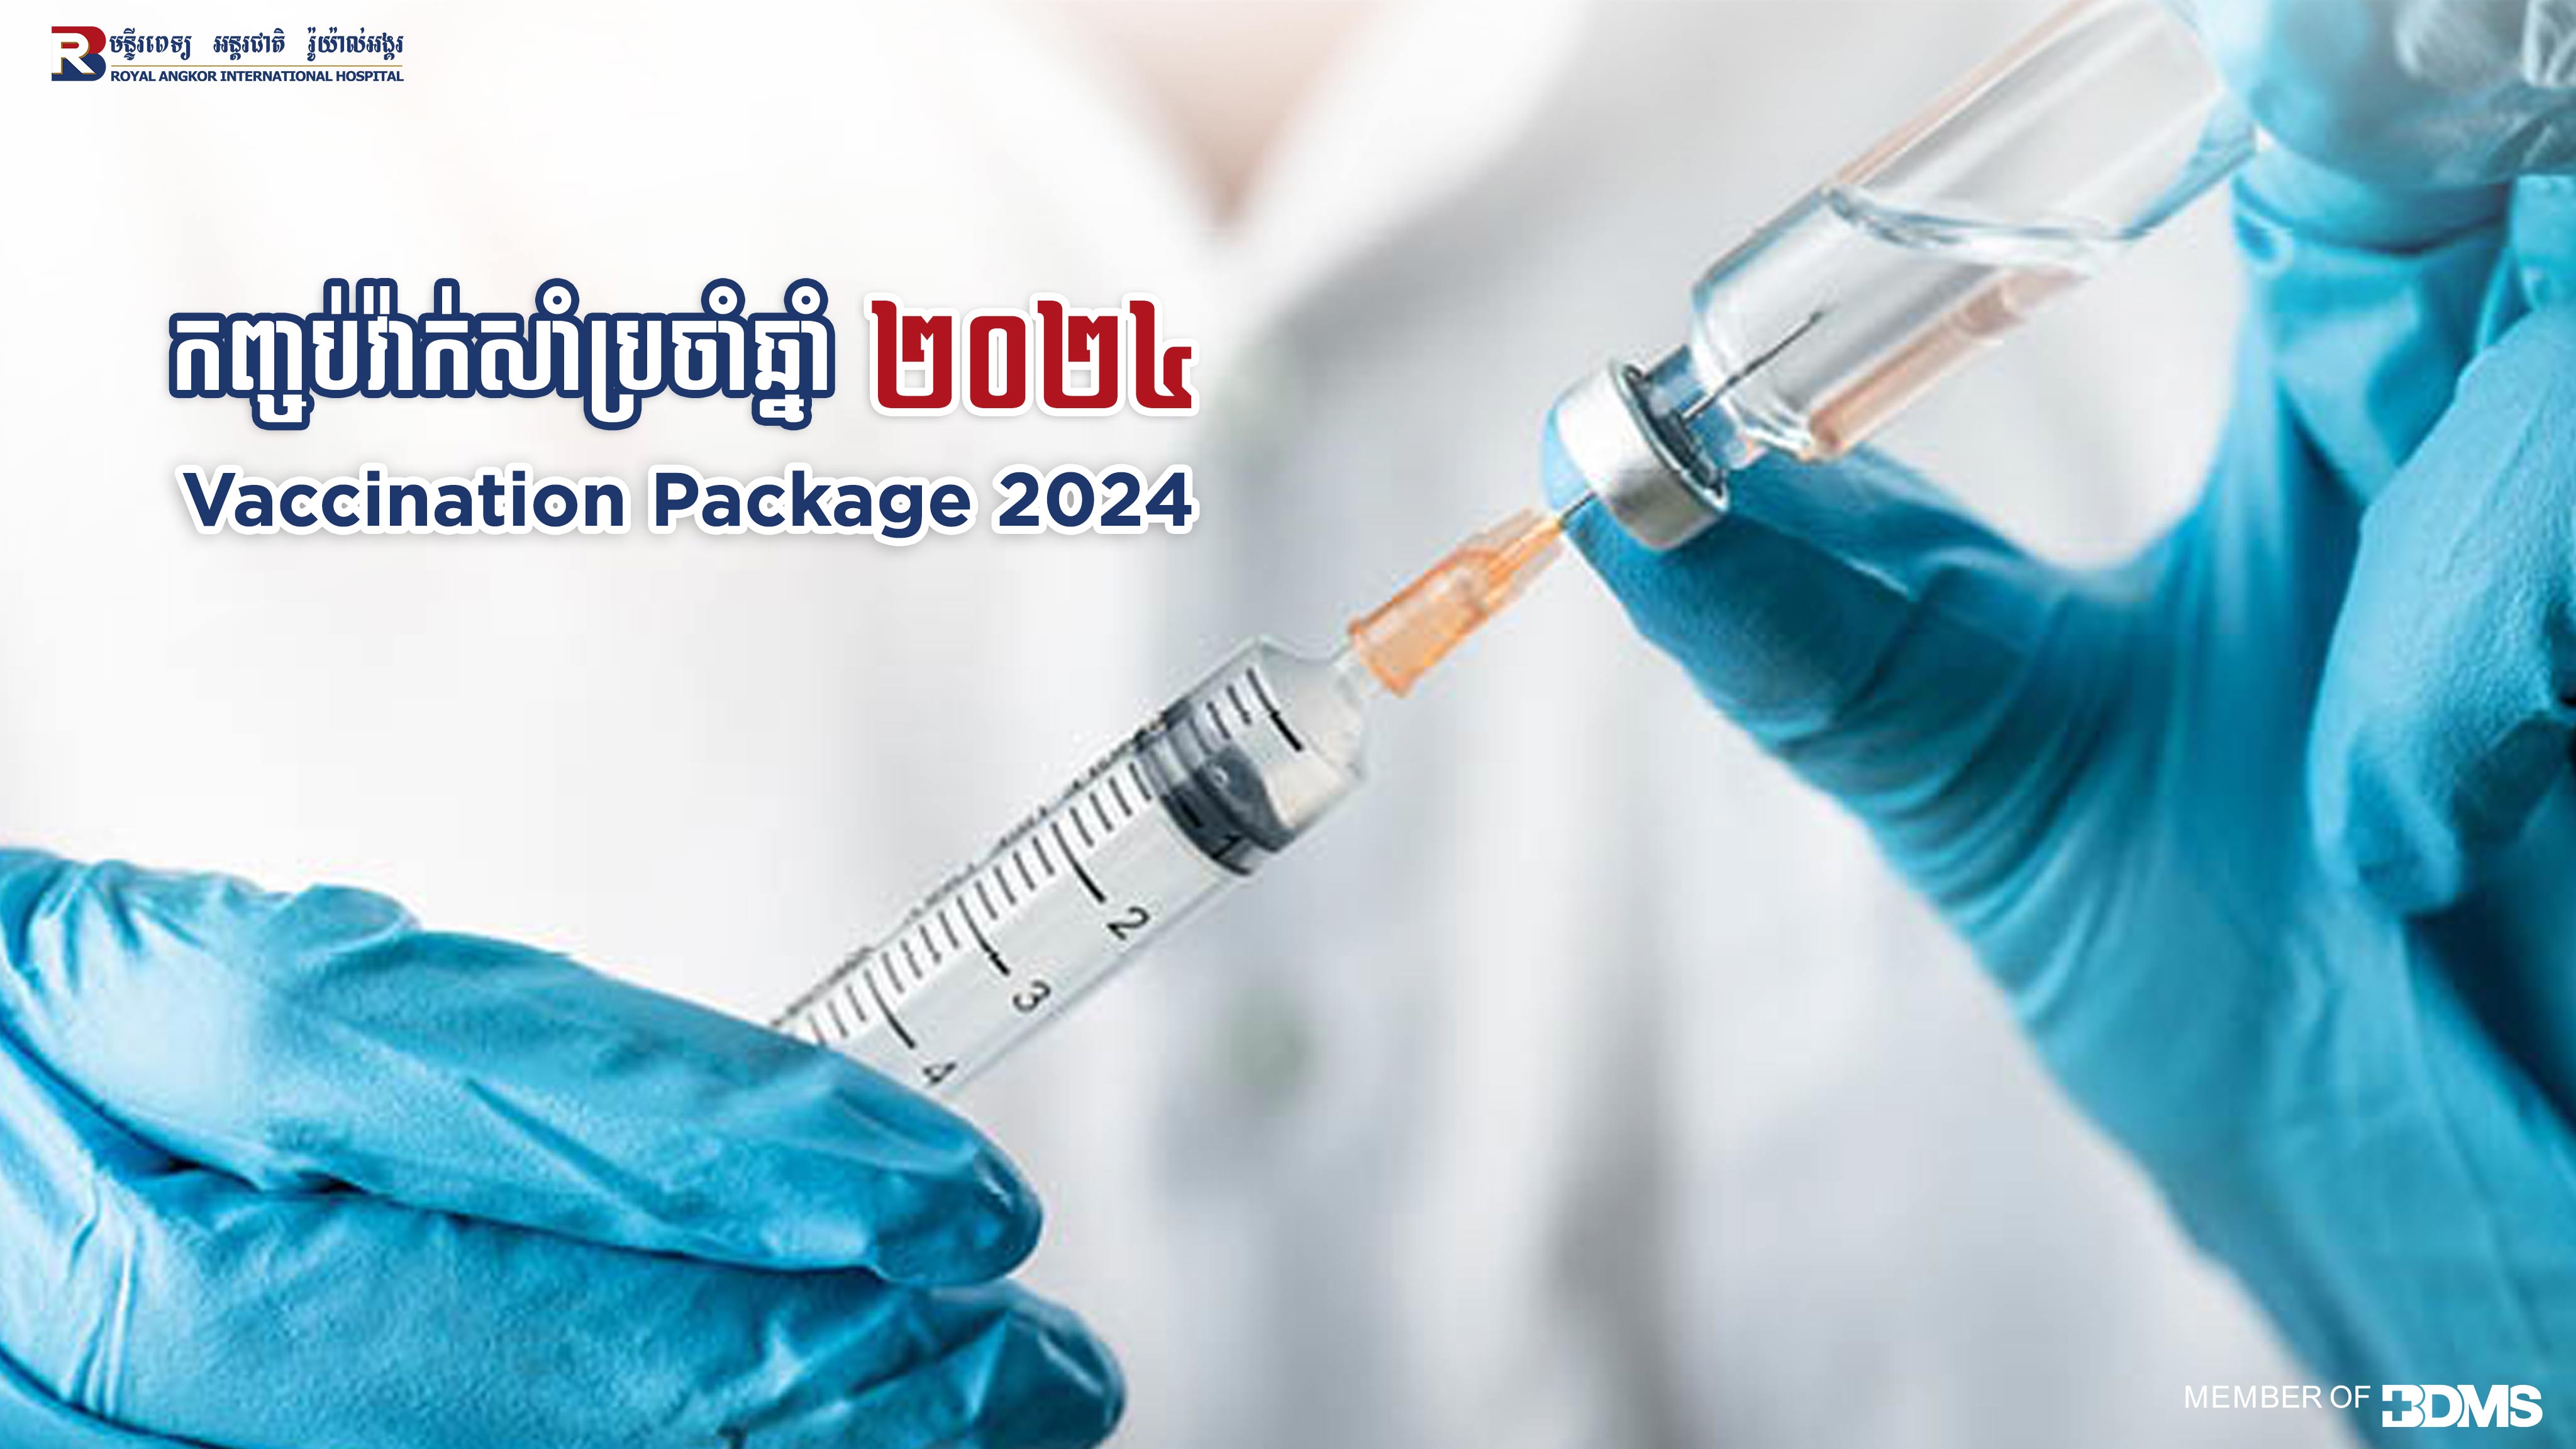 Vaccination Package 2024